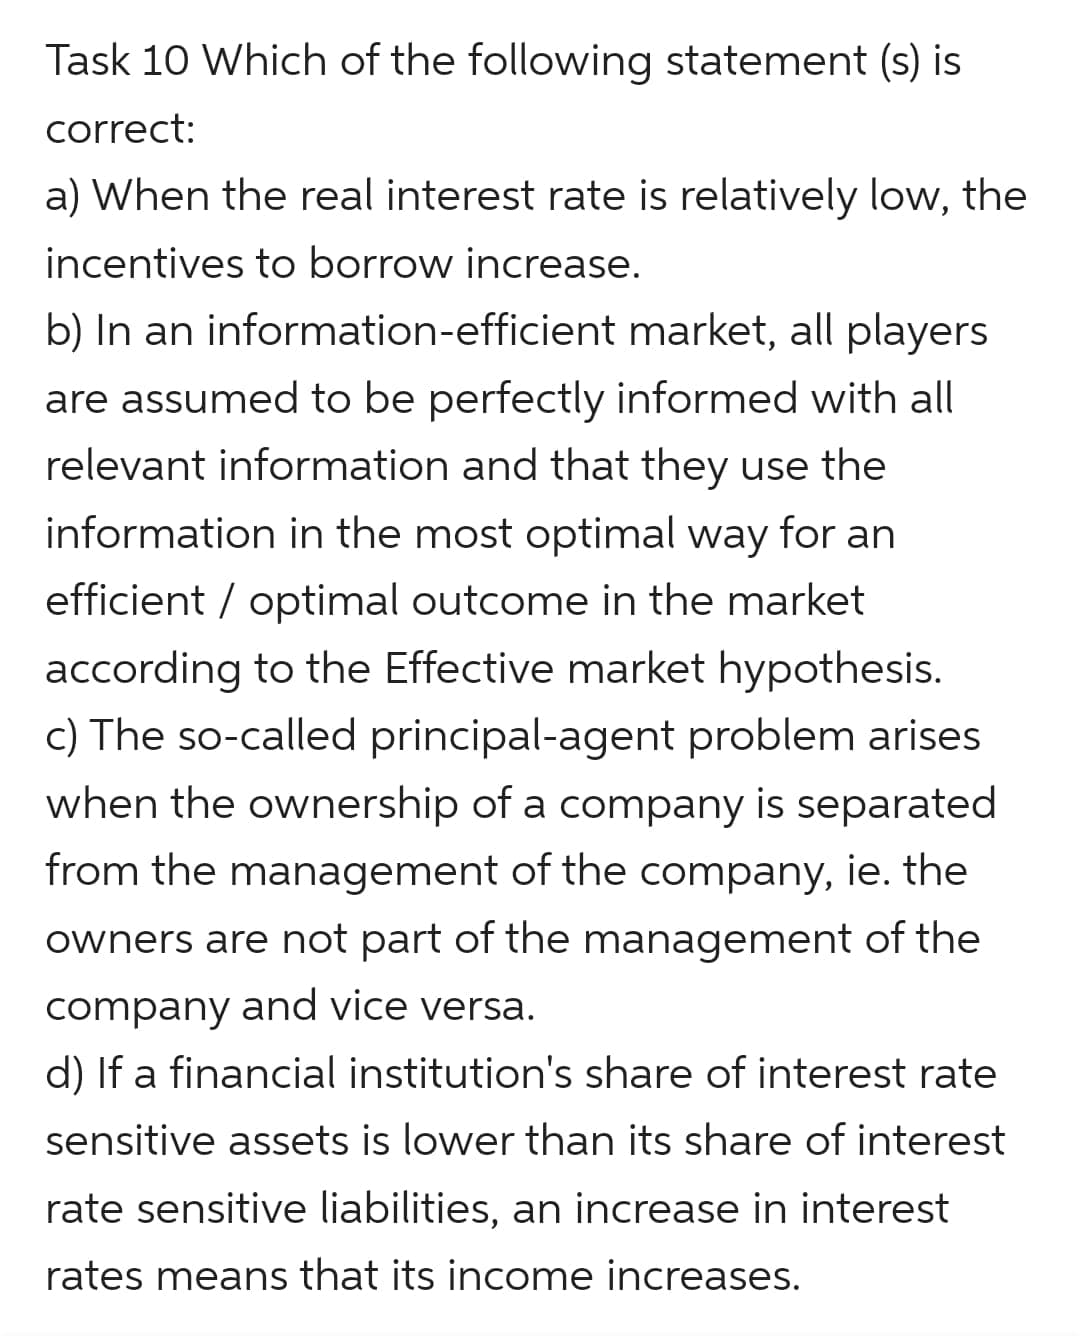 Task 10 Which of the following statement (s) is
correct:
a) When the real interest rate is relatively low, the
incentives to borrow increase.
b) In an information-efficient market, all players
are assumed to be perfectly informed with all
relevant information and that they use the
information in the most optimal way for an
efficient / optimal outcome in the market
according to the Effective market hypothesis.
c) The so-called principal-agent problem arises
when the ownership of a company is separated
from the management of the company, ie. the
owners are not part of the management of the
company and vice versa.
d) If a financial institution's share of interest rate
sensitive assets is lower than its share of interest
rate sensitive liabilities, an increase in interest
rates means that its income increases.